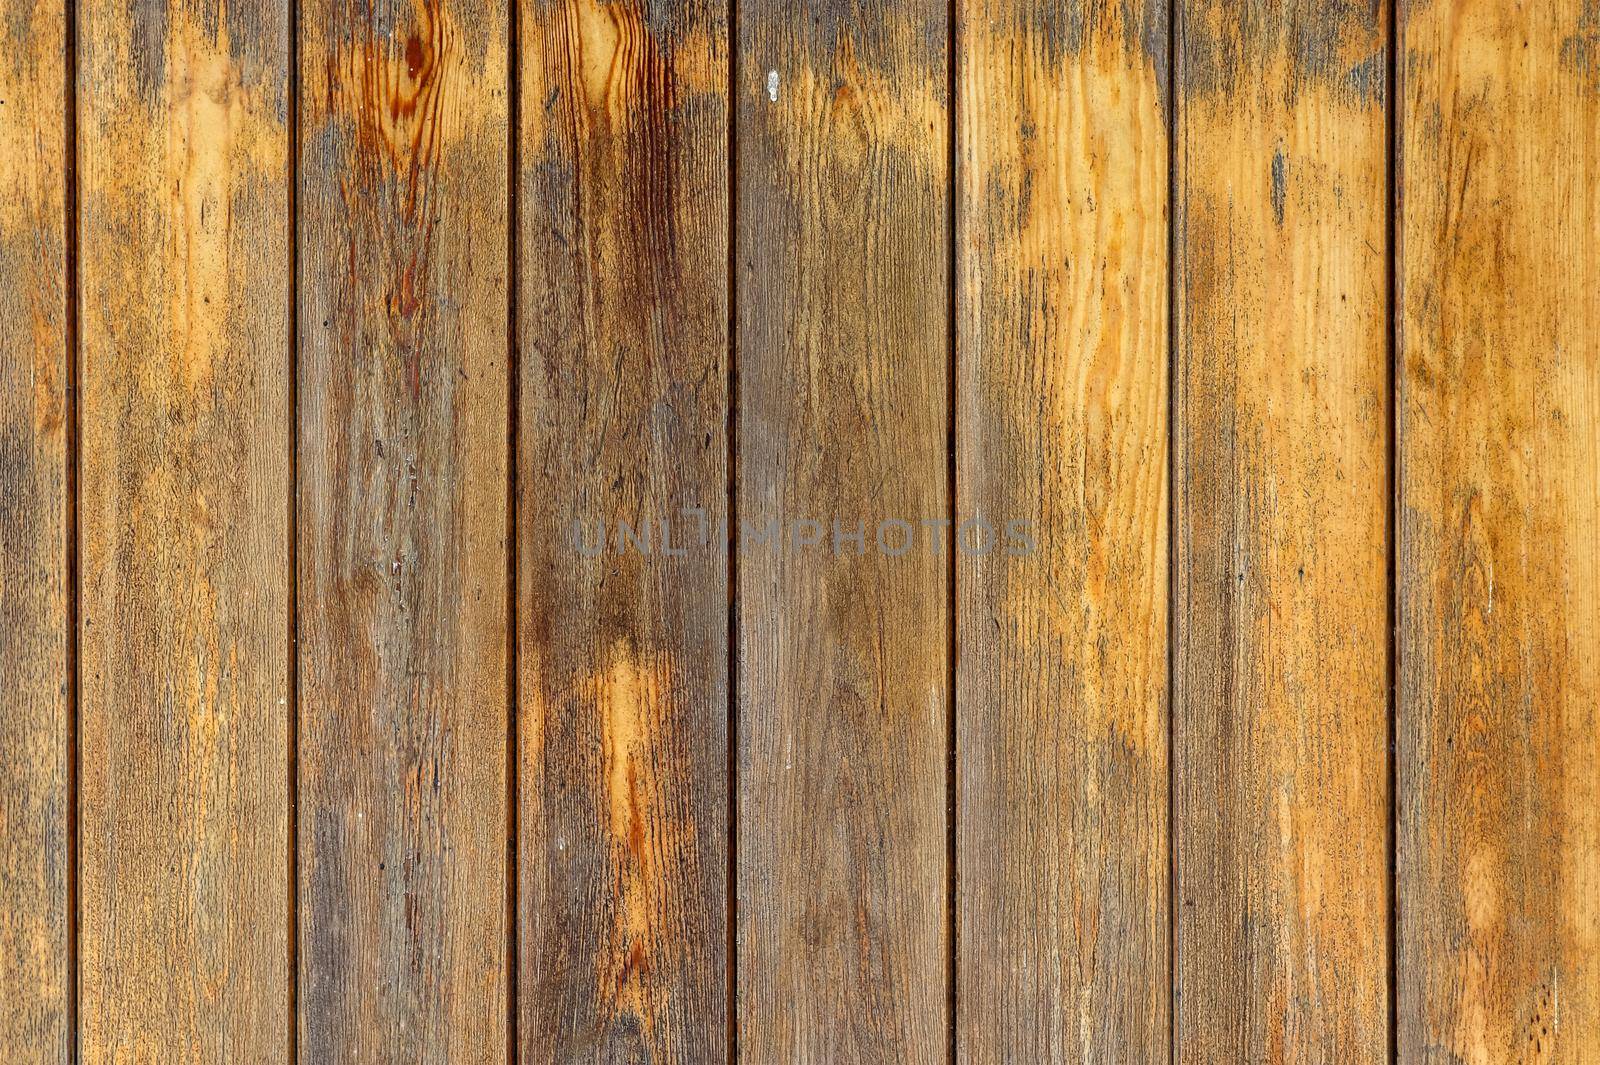 Close up view on different wood surfaces of planks logs and wooden walls in high resolution by MP_foto71